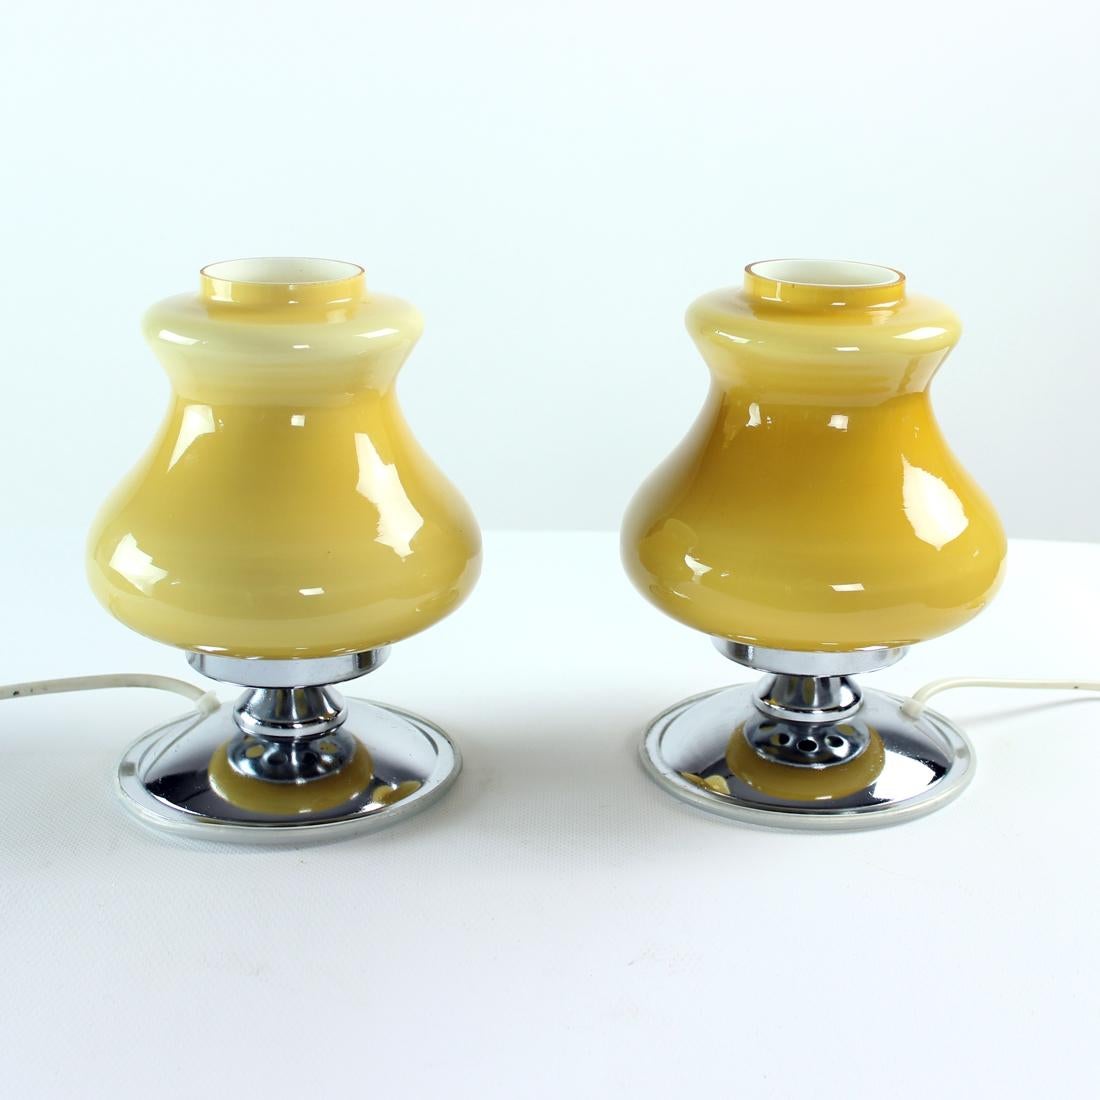 Set of two beautiful table lamps from mid-century design era. The lamps are produced in Bulgaria by Kamasit company. The finish is really lovely. Each lamp has a chrome metal base with a bottom lid in plastic (to protect furniture from scratching).